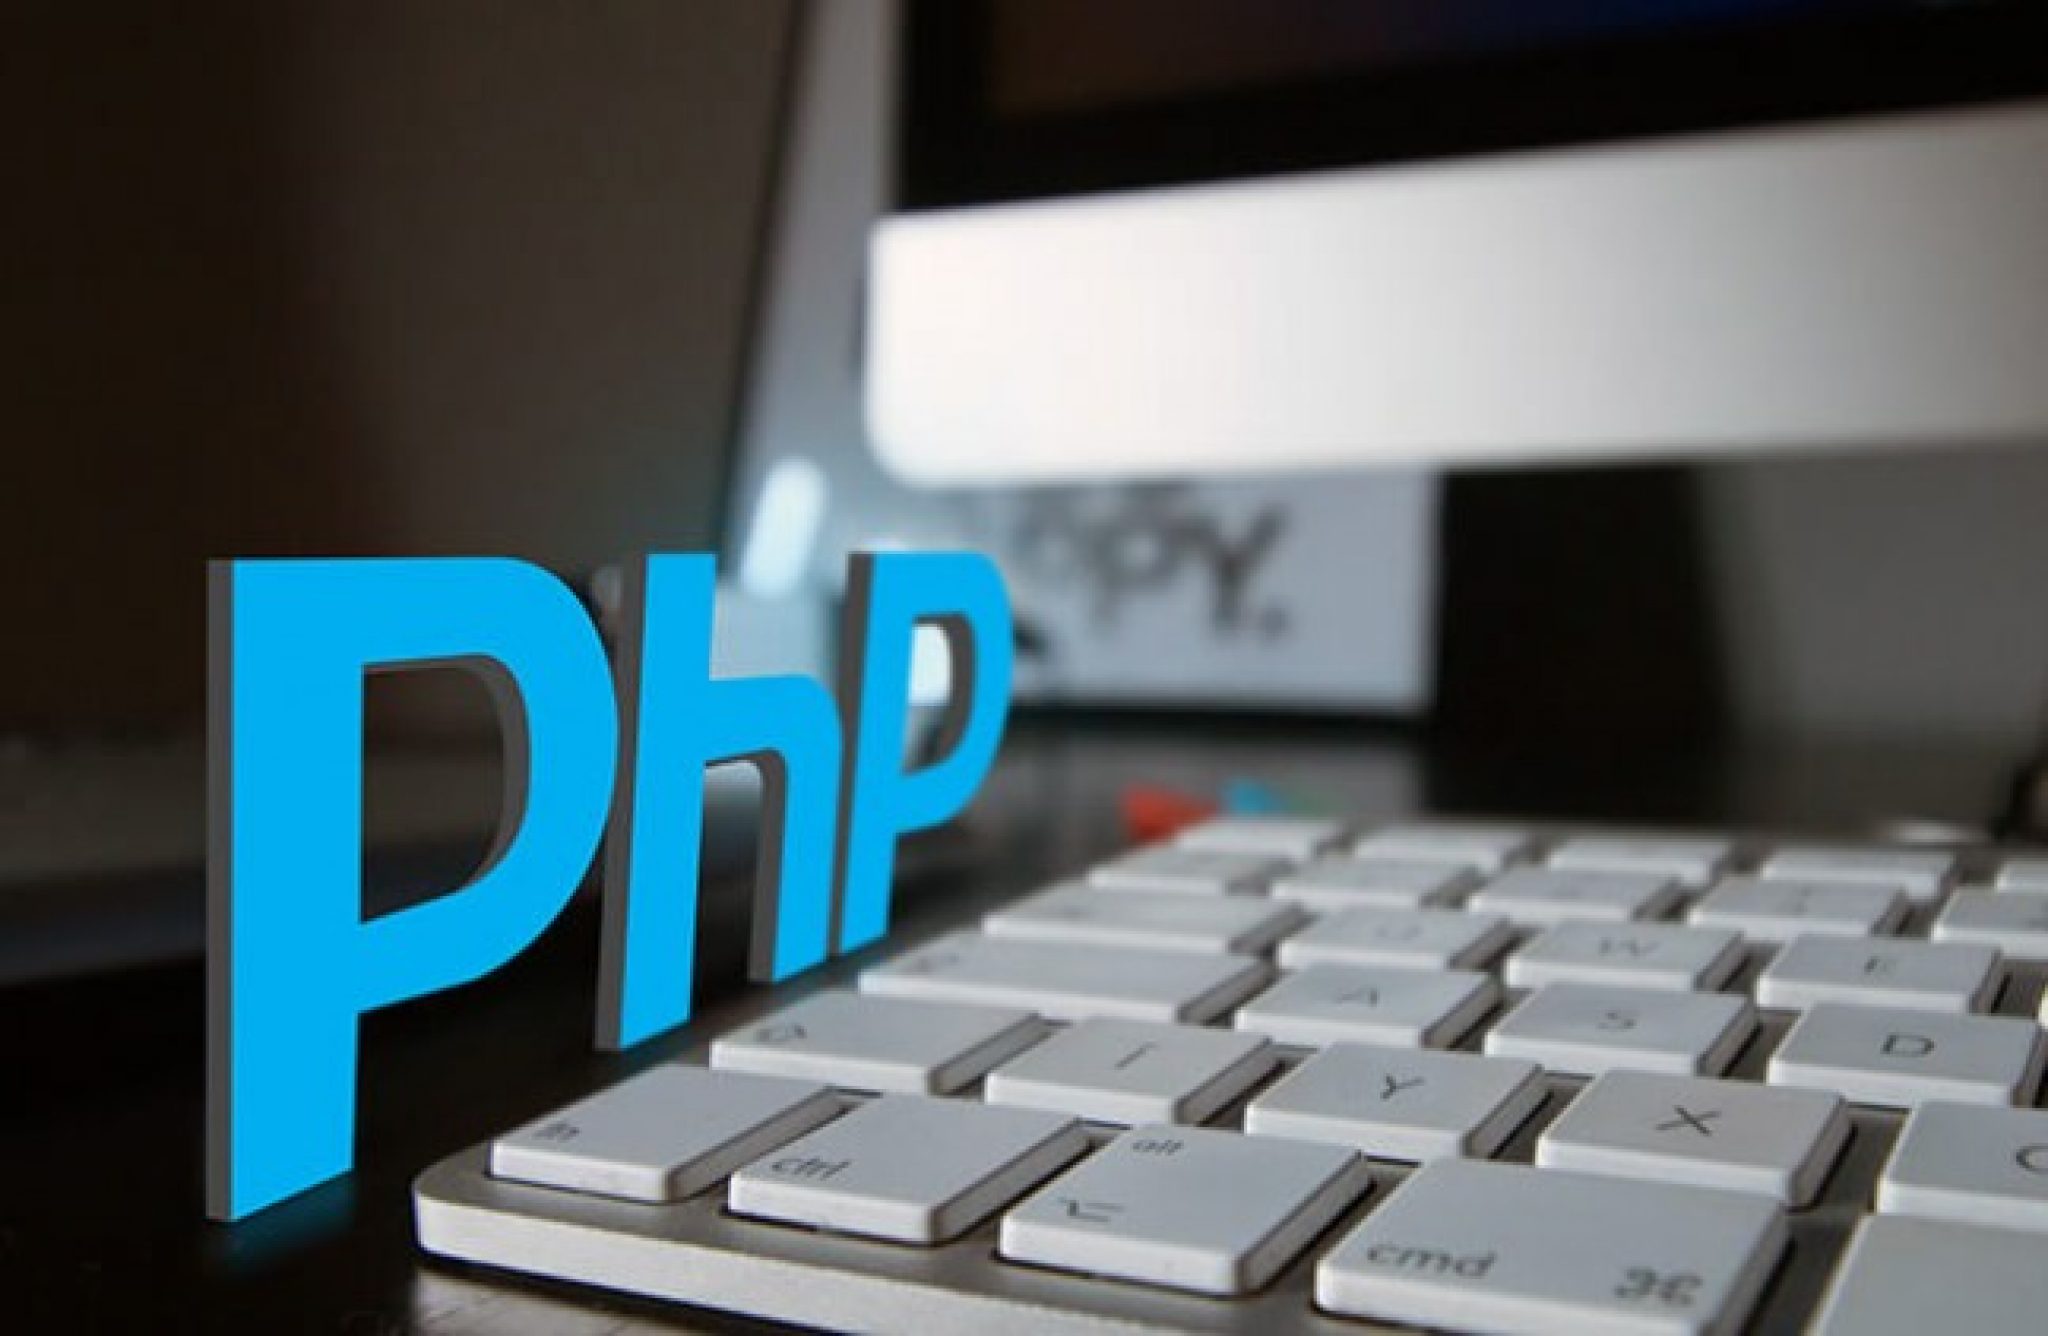 Reporting php. Php обои. Php фото. Php заставка. Php разработка.